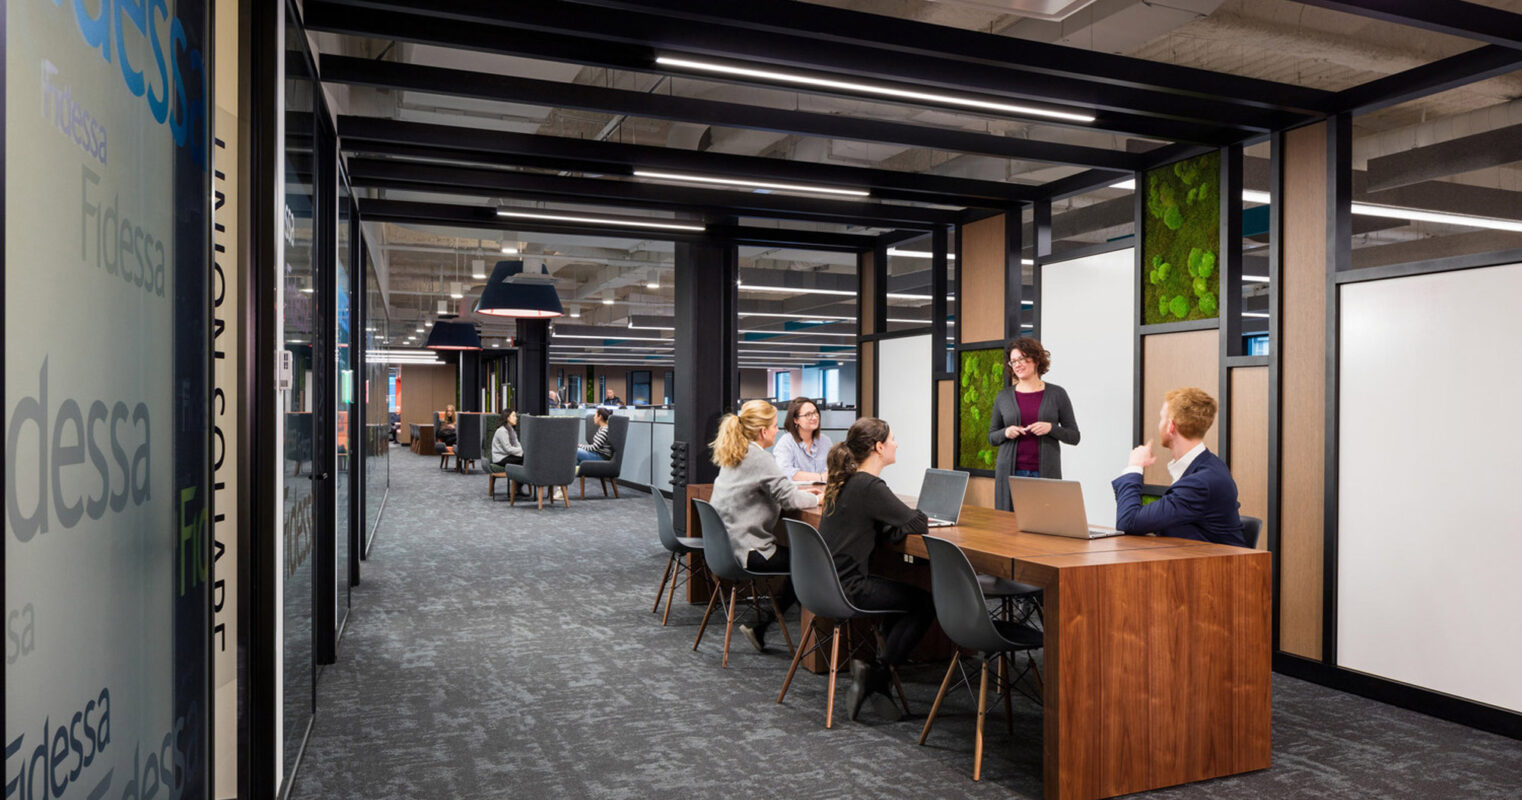 Modern office interior featuring a collaborative workspace with natural wood tables, ergonomic chairs, and privacy booths framed by black metal accents. Ambient lighting and greenery enhance a productive yet comfortable work environment for the group discussion taking place.